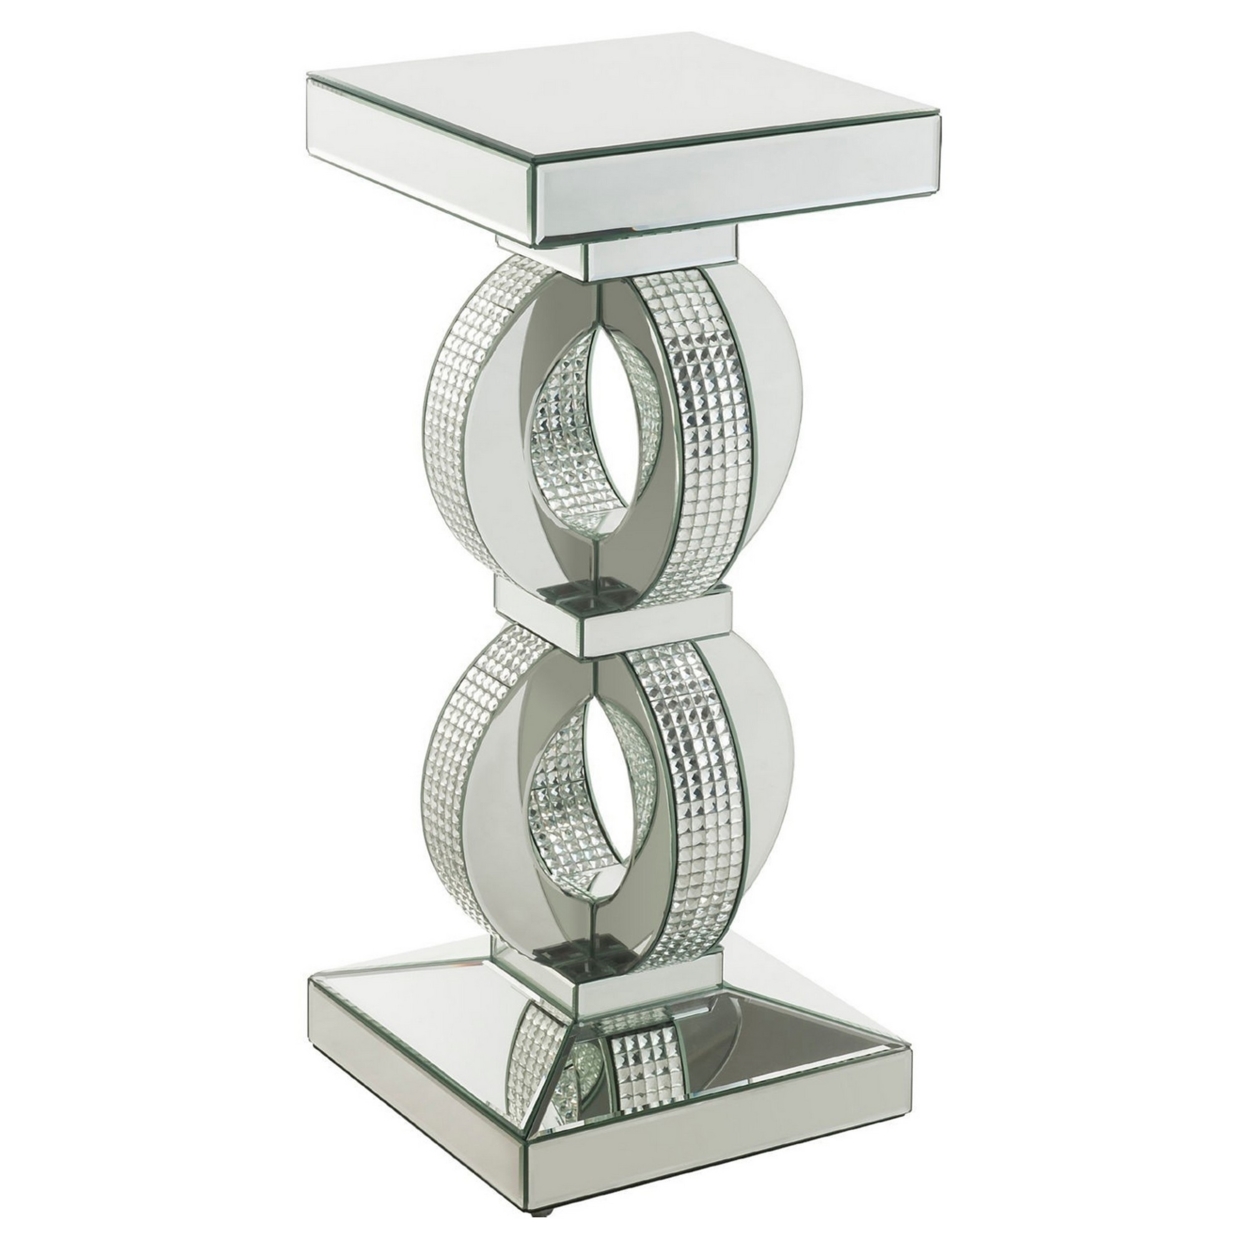 Accent Table With Interconnected Rings And Mirror Trim, Large, Silver- Saltoro Sherpi